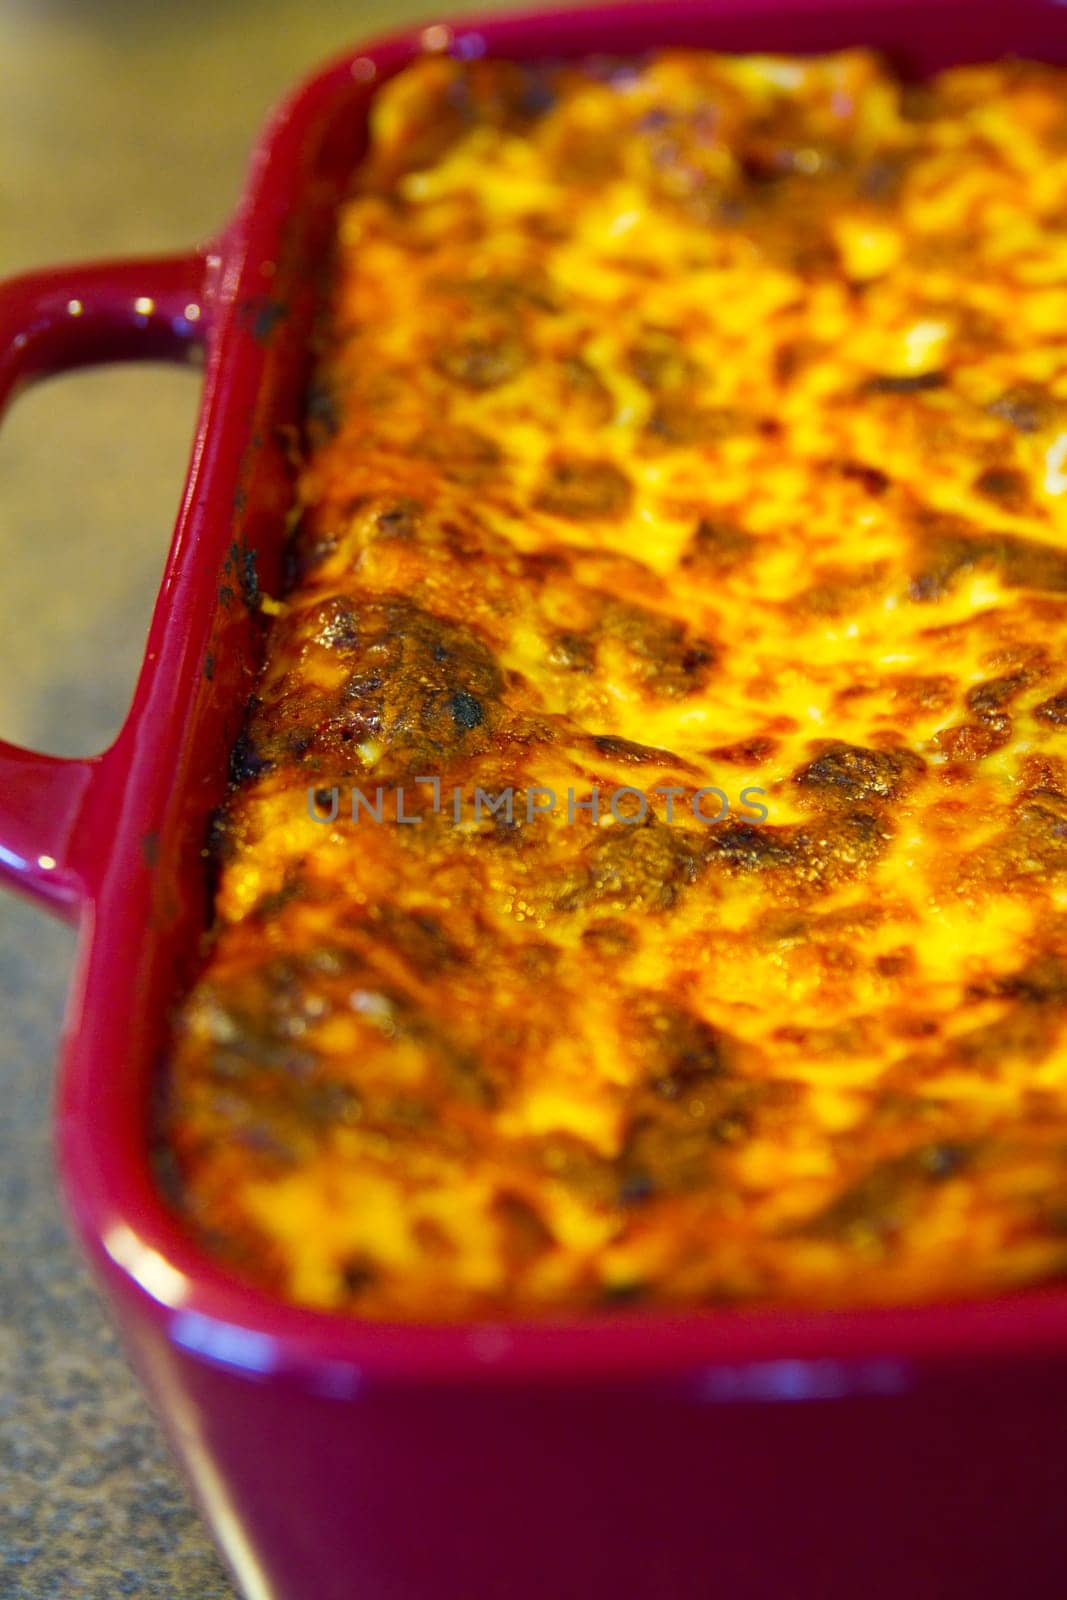 Indulge in a mouthwatering baked casserole masterpiece, featuring a golden-brown, bubbling cheese crust, served in a vibrant red dish. Perfect comfort food for family meals and culinary delights.